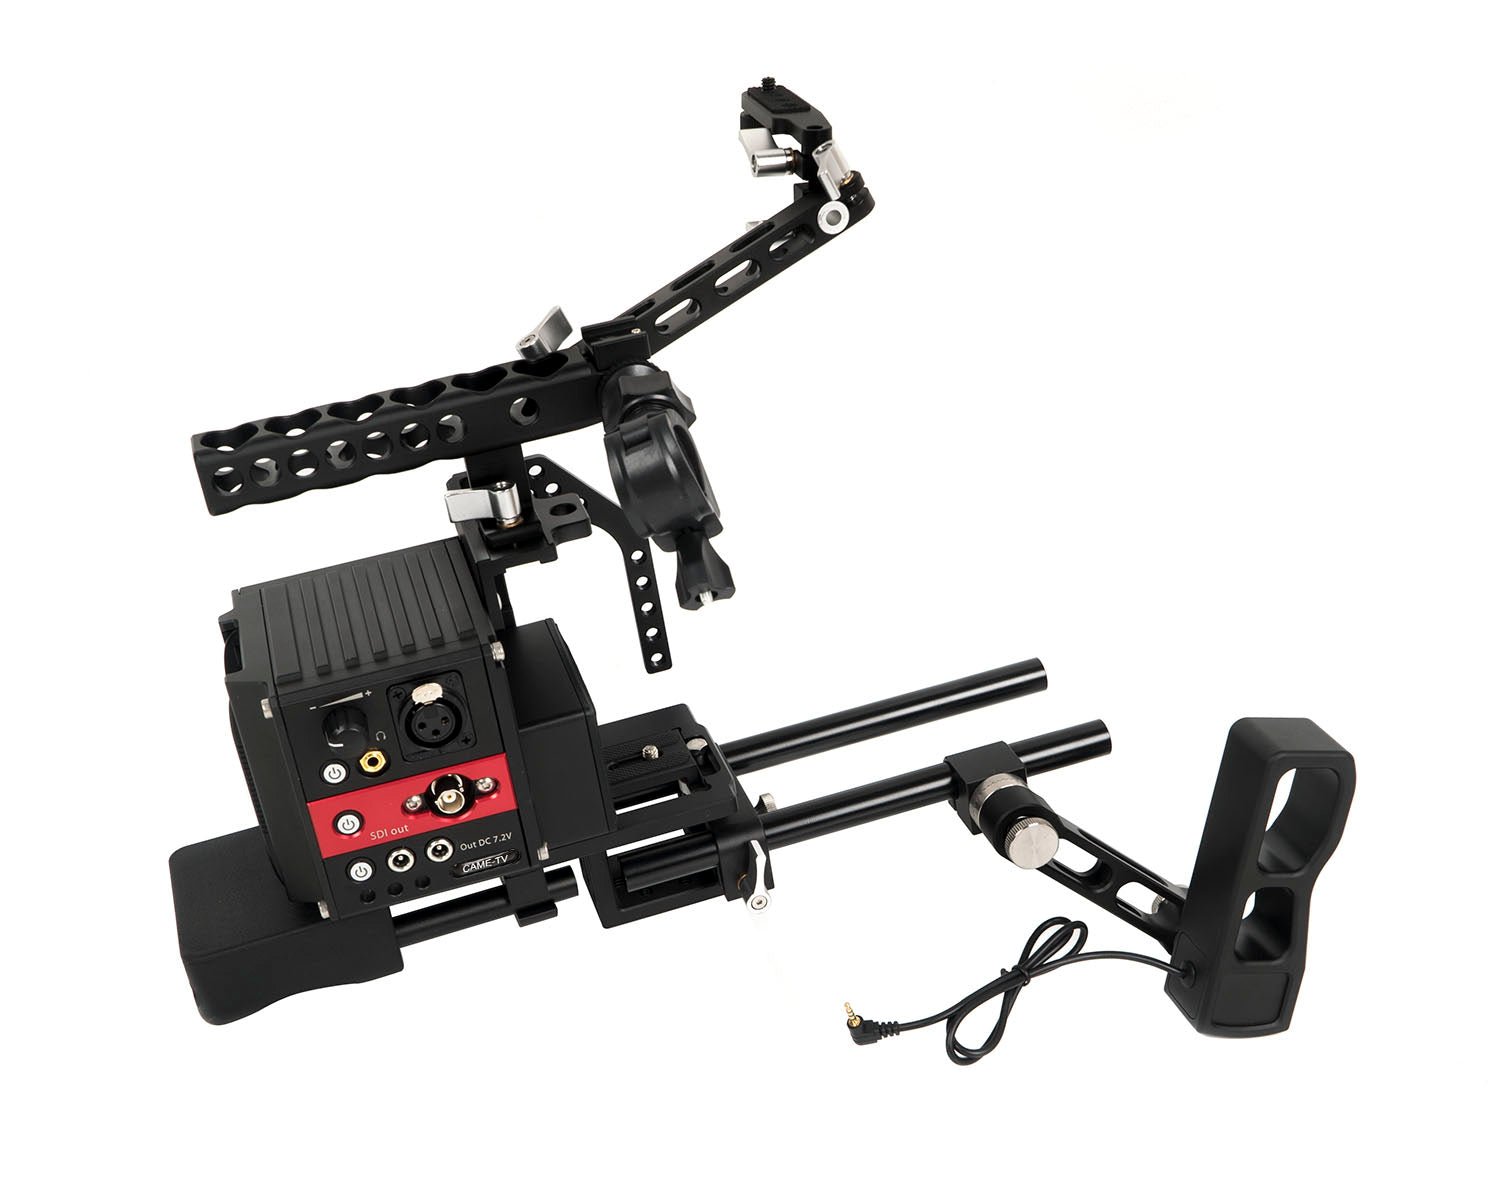 CAME-TV Terapin Rig For Sony A7R2, A7S2 and A72 - CAME-TV